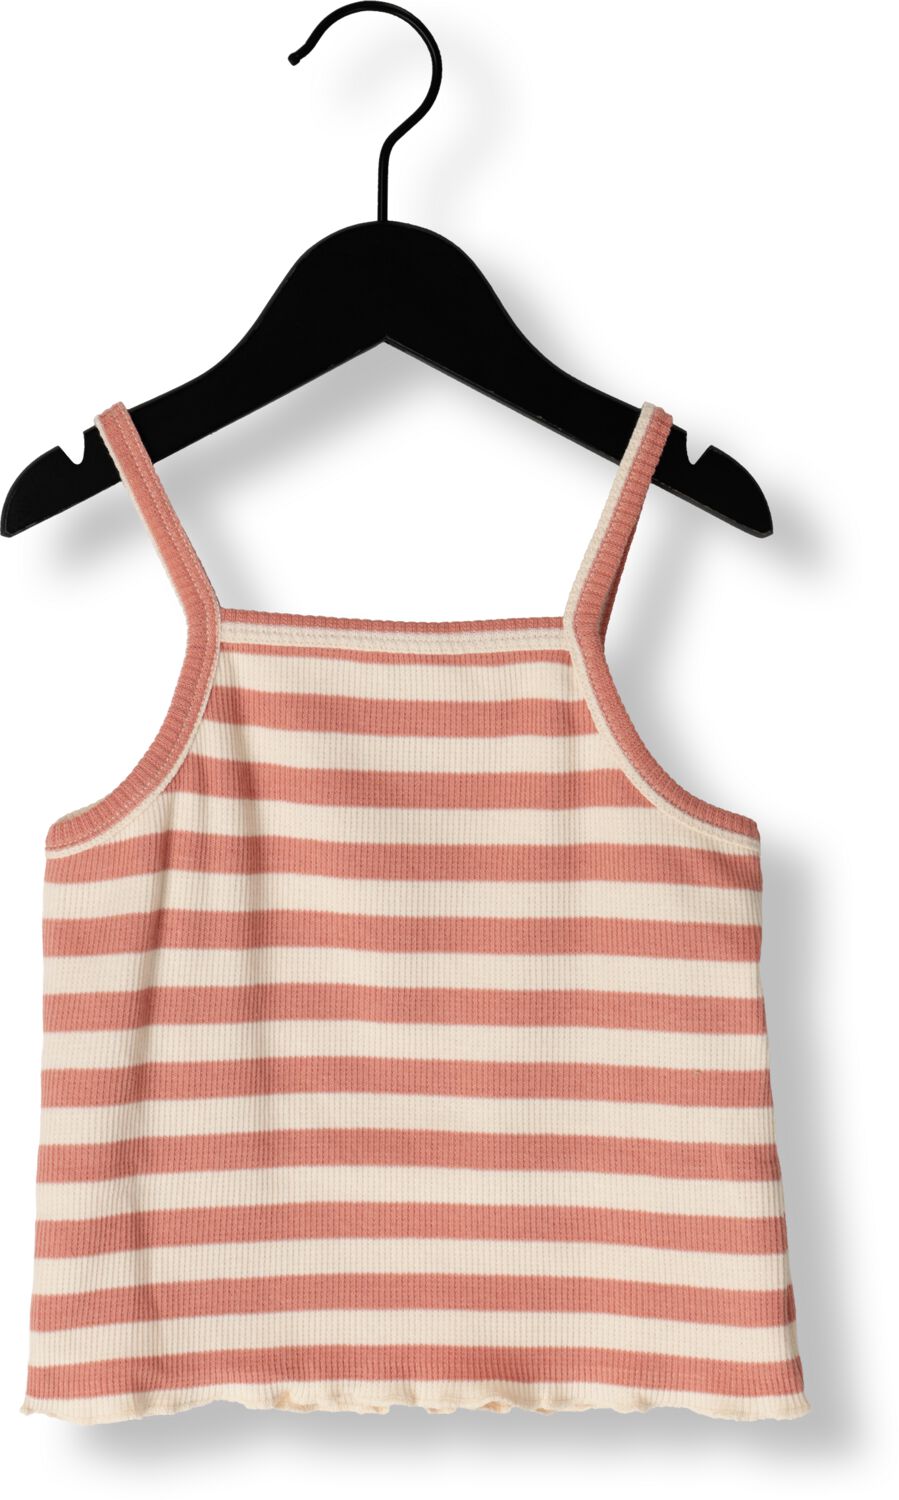 PLAY UP Meisjes Tops & T-shirts Striped Rib Top Roze-100